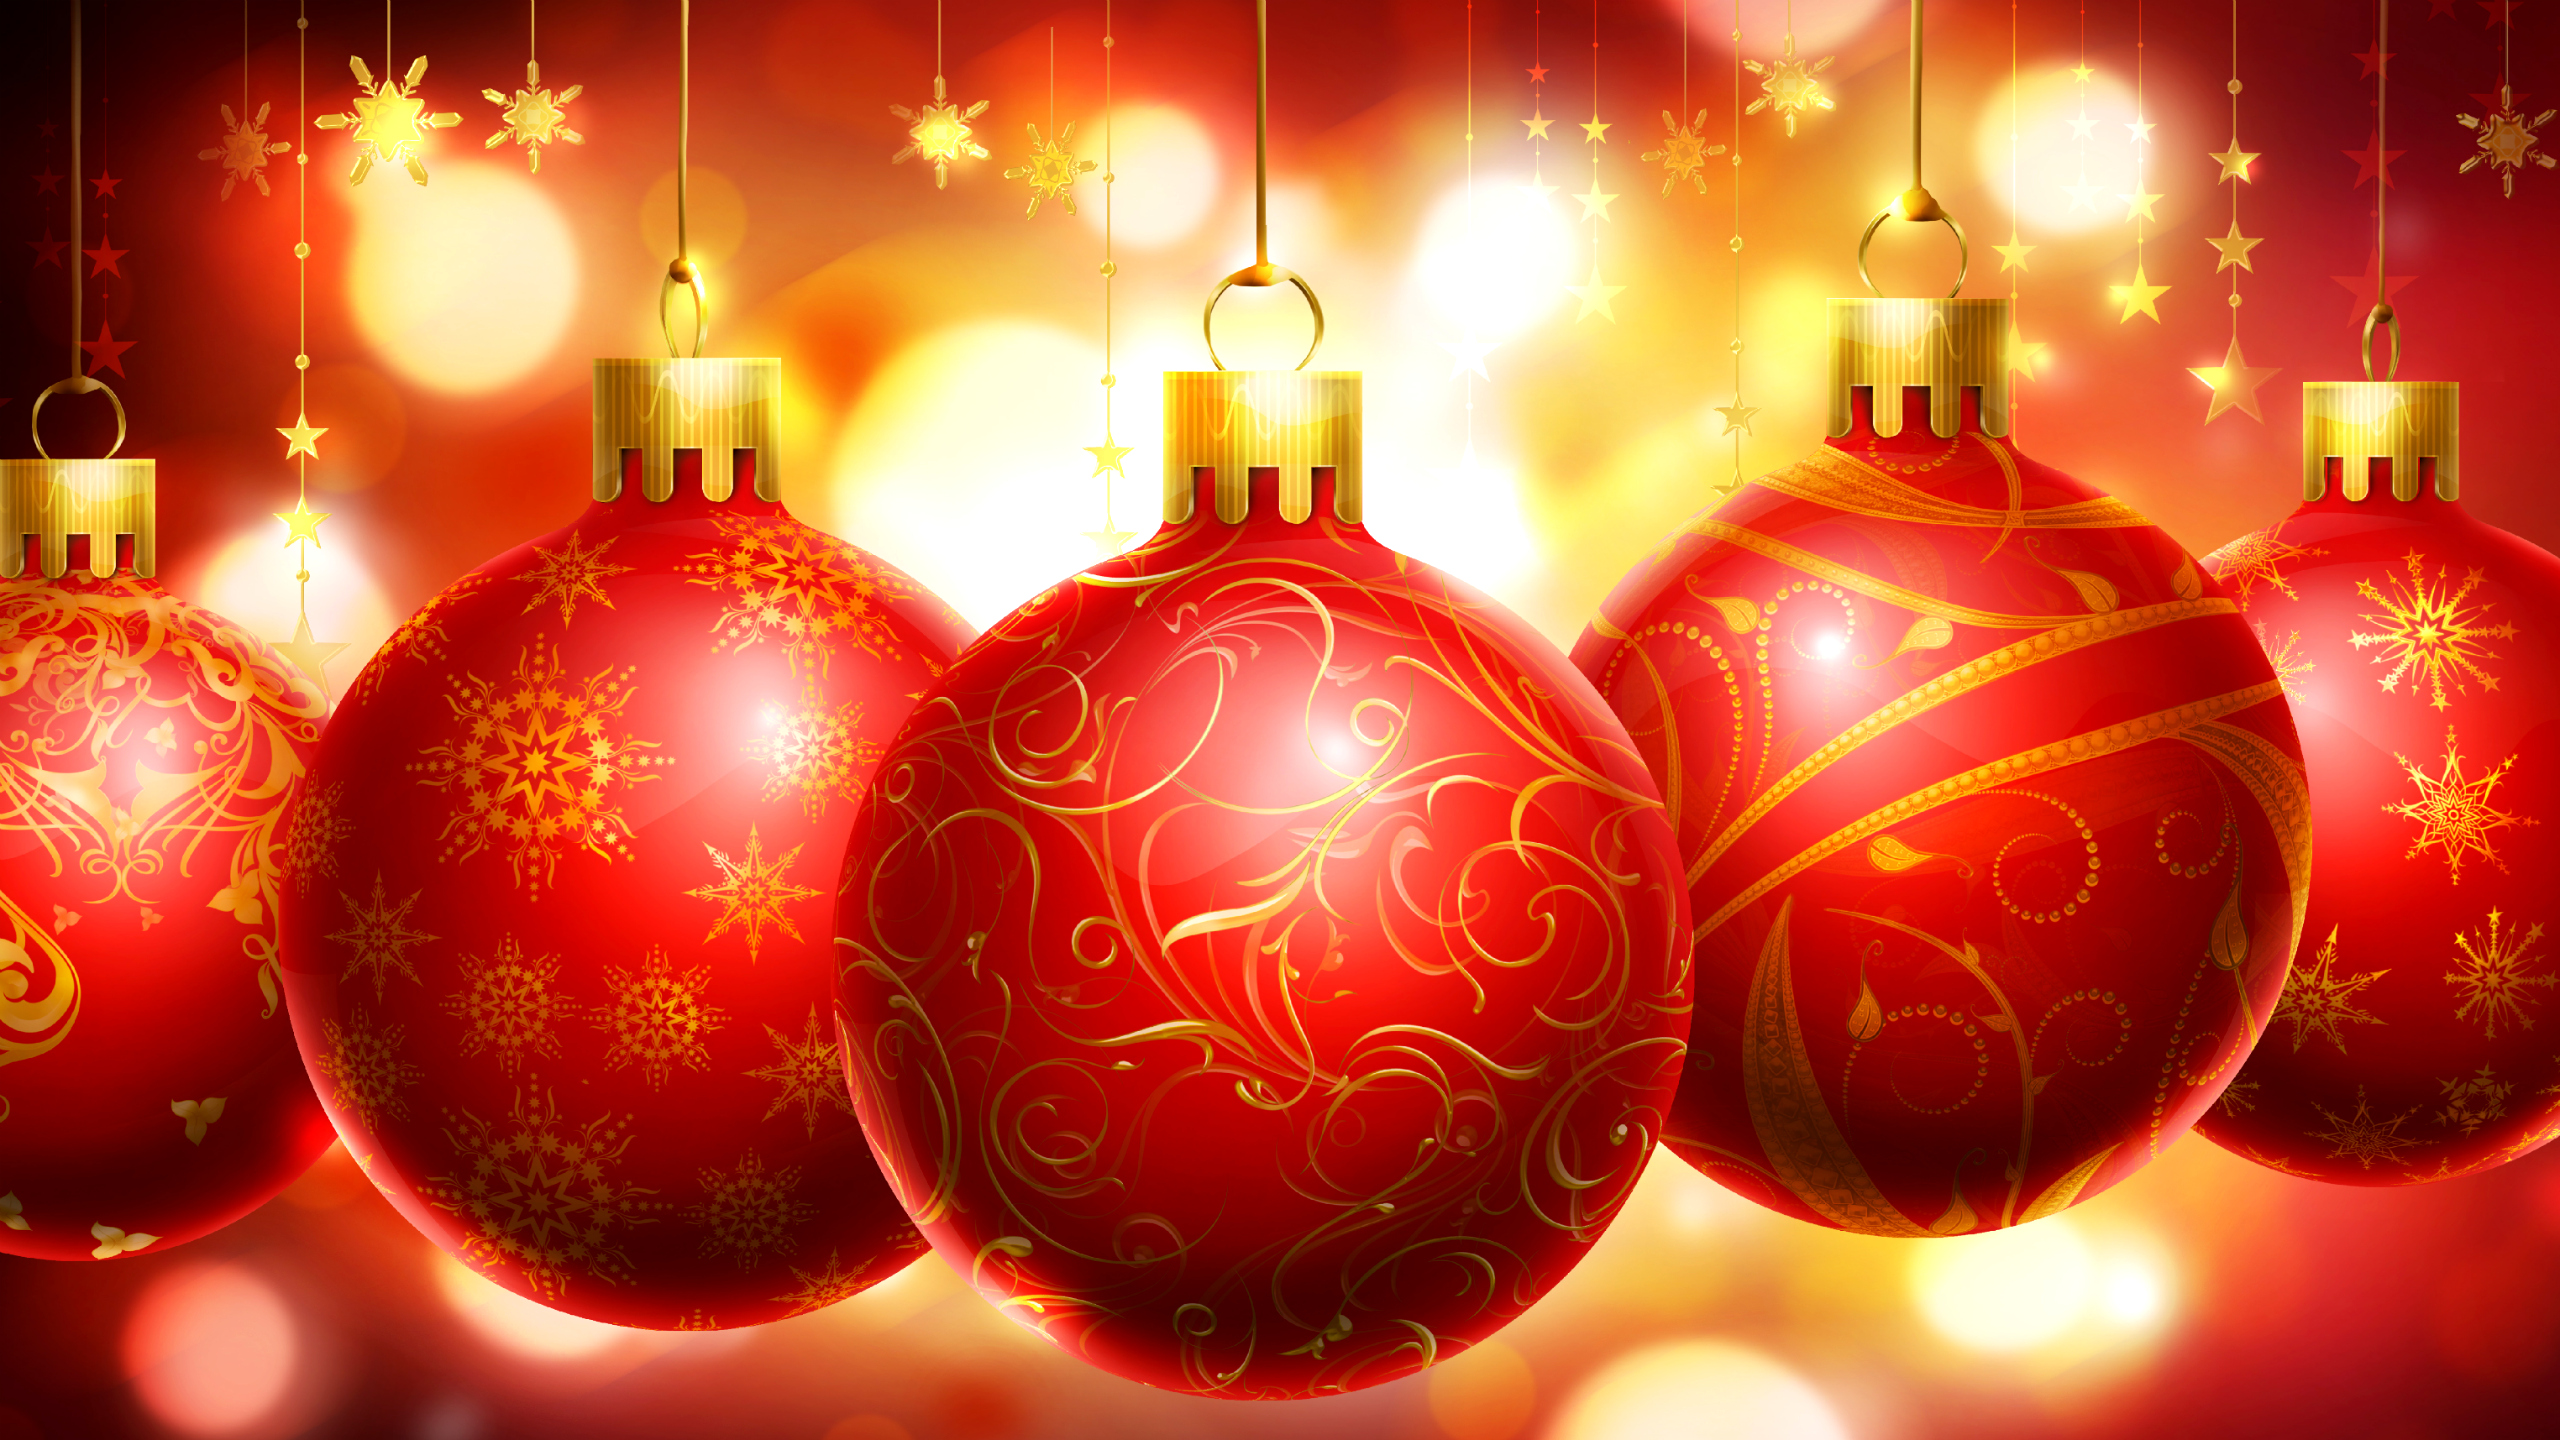 Merry Christmas Decorations Red HD Wallpaper For